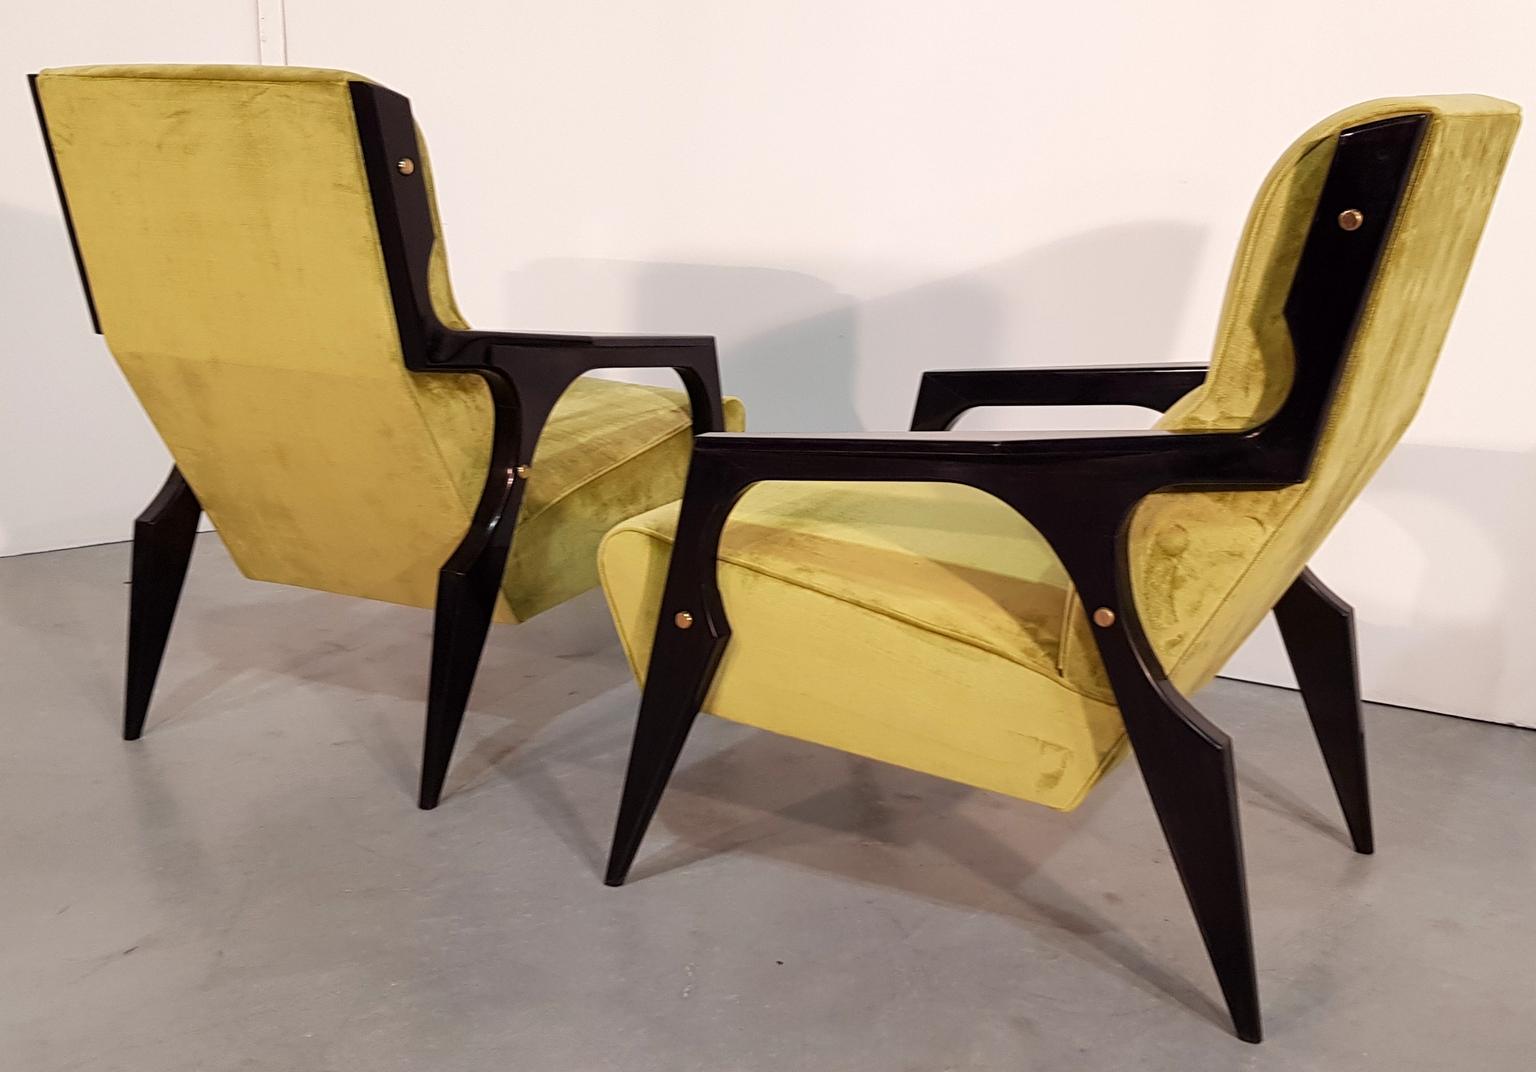 Painted Pair of Italian Midcentury Green Upholstered Armchairs by Gio Ponti, 1950s For Sale